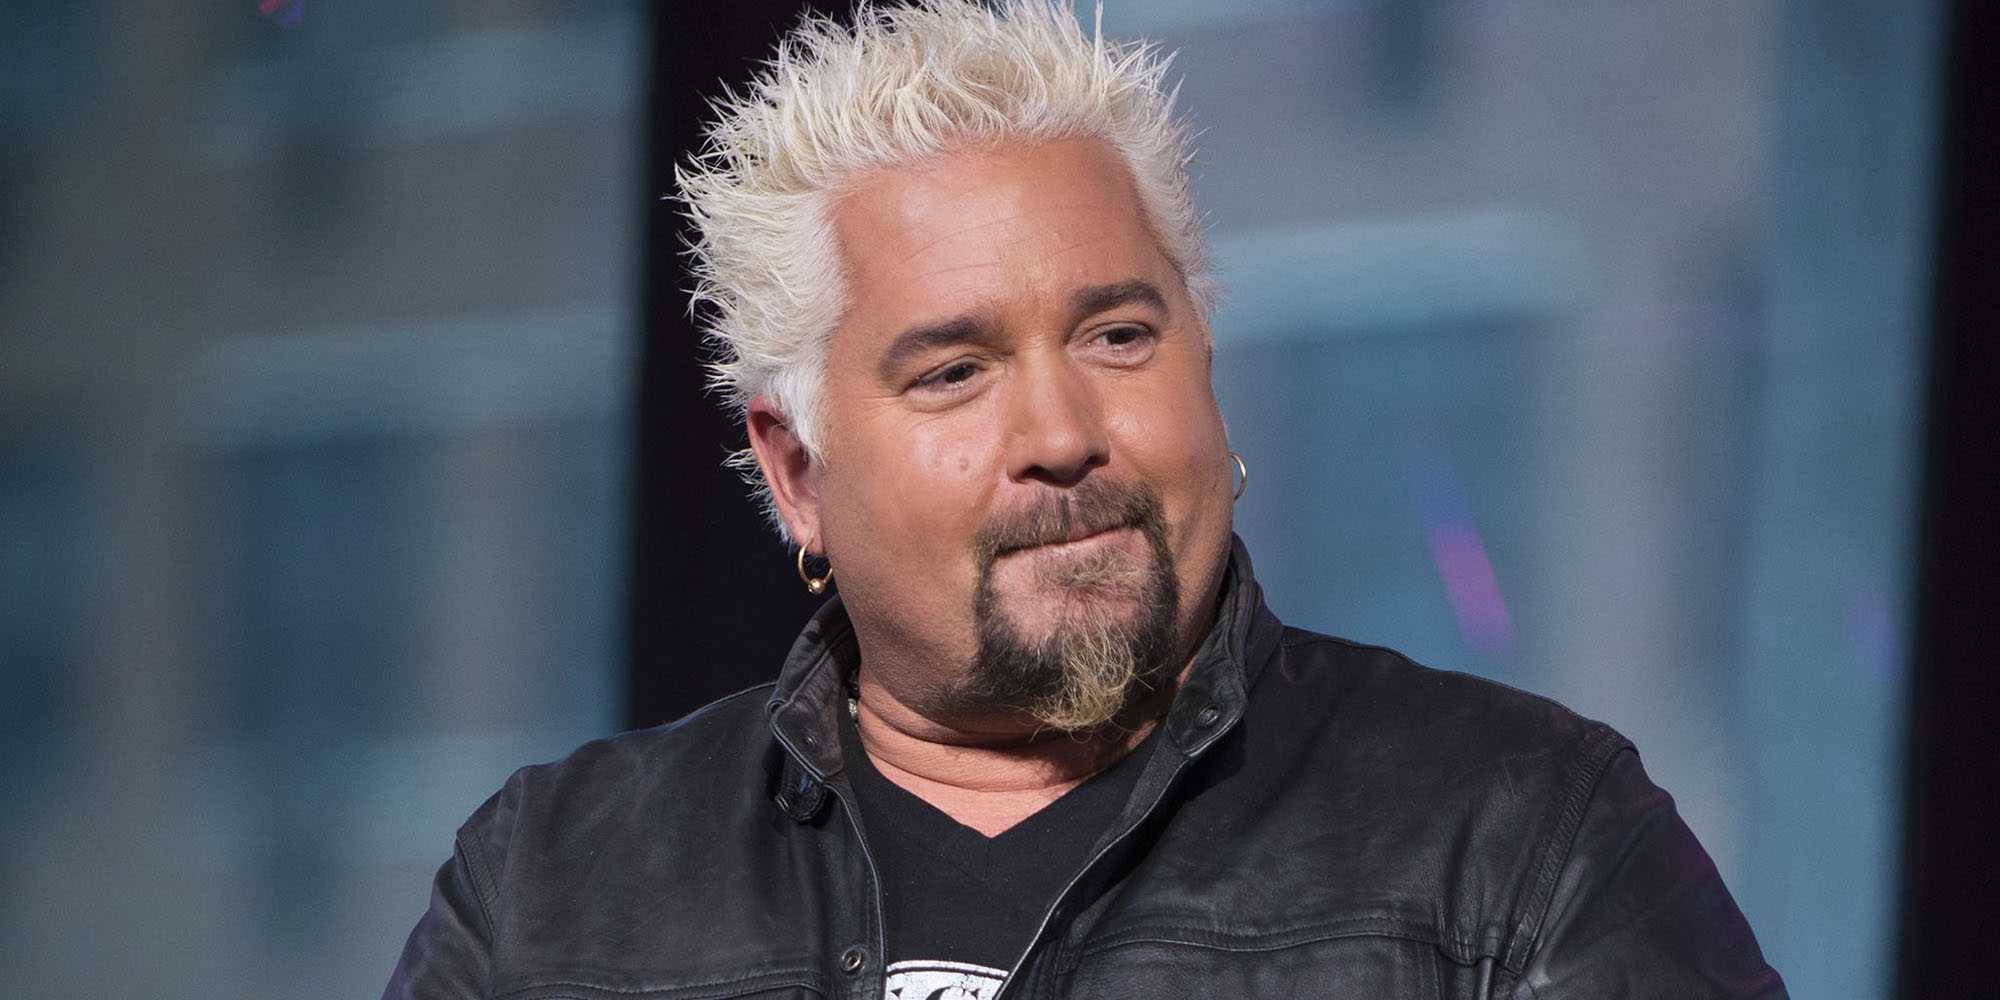 Guy Fieri hates his infamous flame shirt